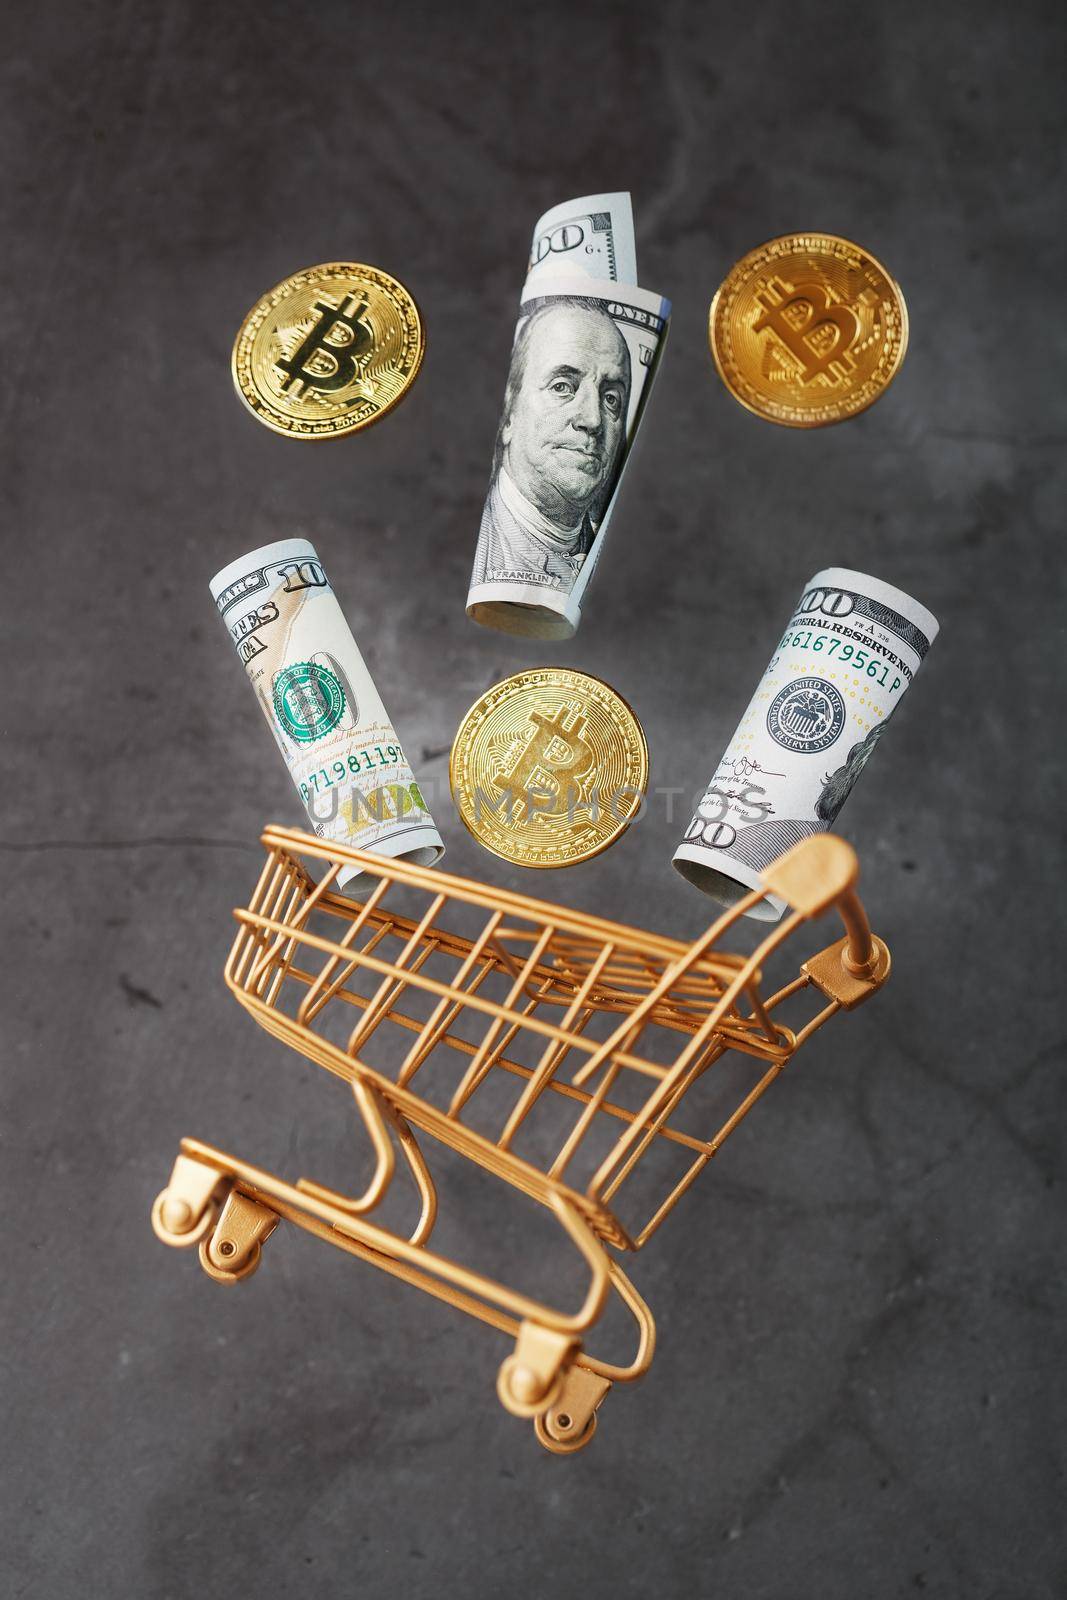 Dollar bills and itkon coins flew out of the Golden Basket on a dark background. Concept businesses, finance, trading, or stock exchange investments